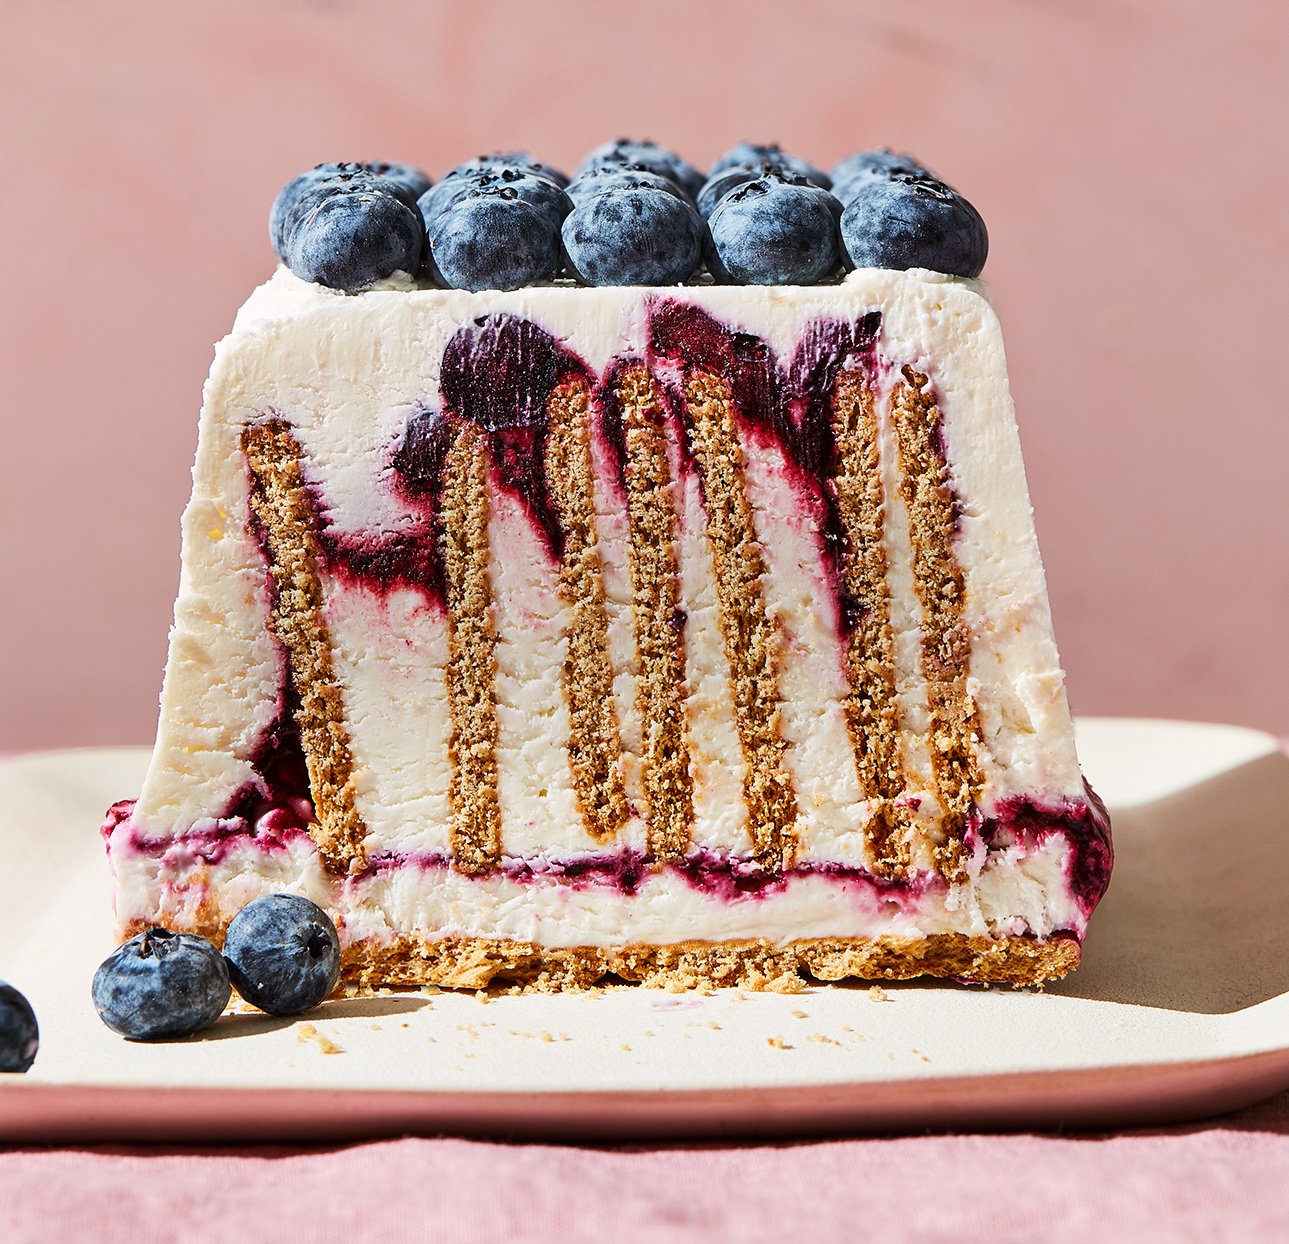 Dessert crisis: healthy & fit solutions